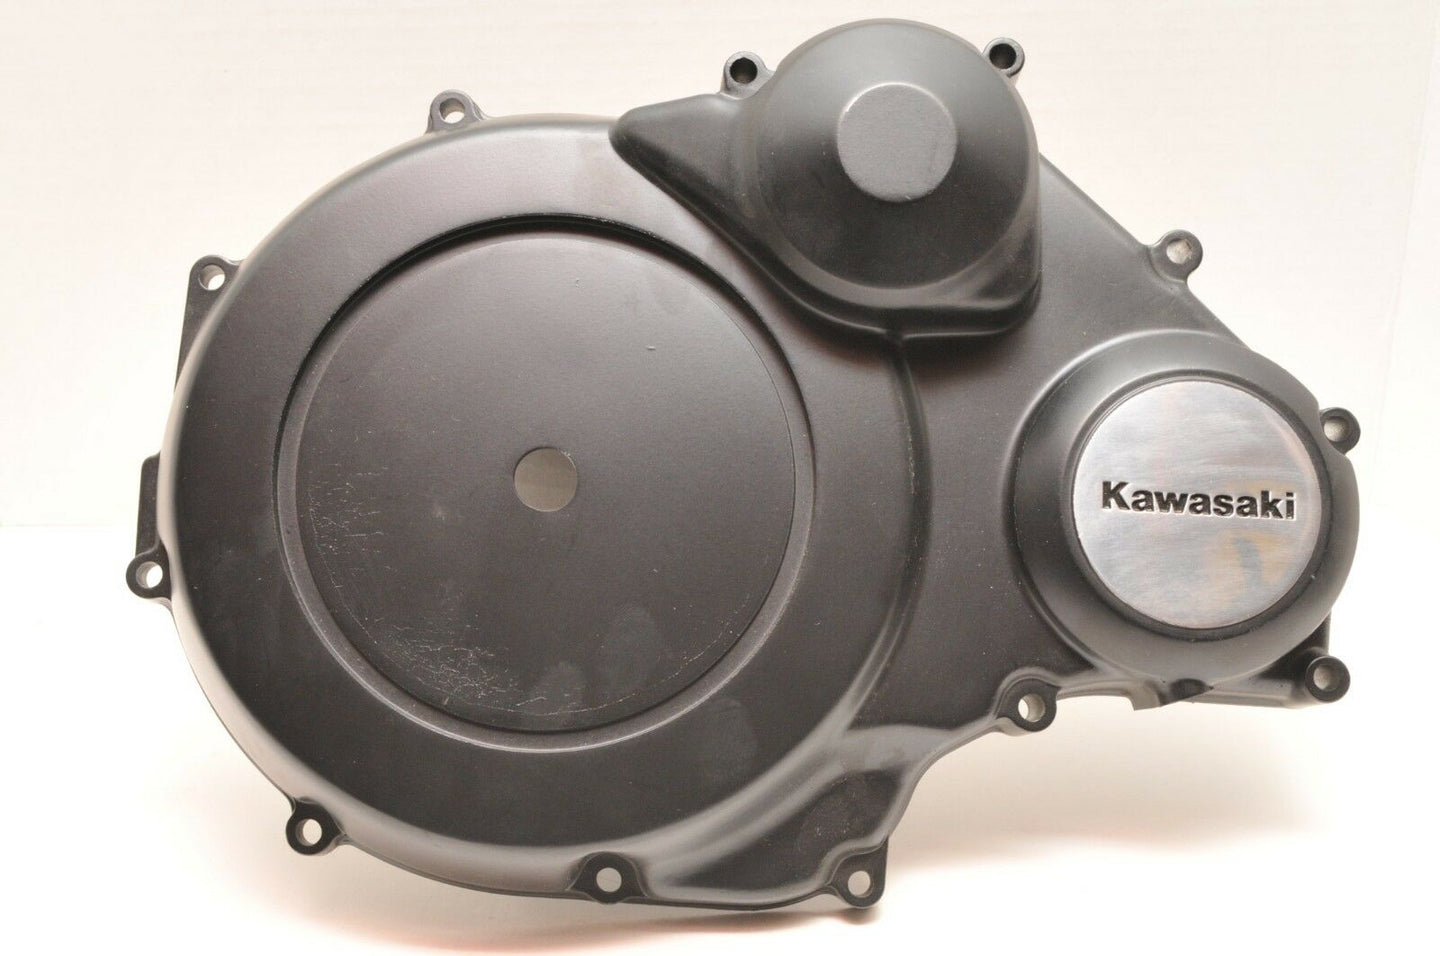 OEM Kawasaki CLUTCH COVER (ENGINE RIGHT SIDE) 14024-1067 * HAS IMPERFECTIONS *